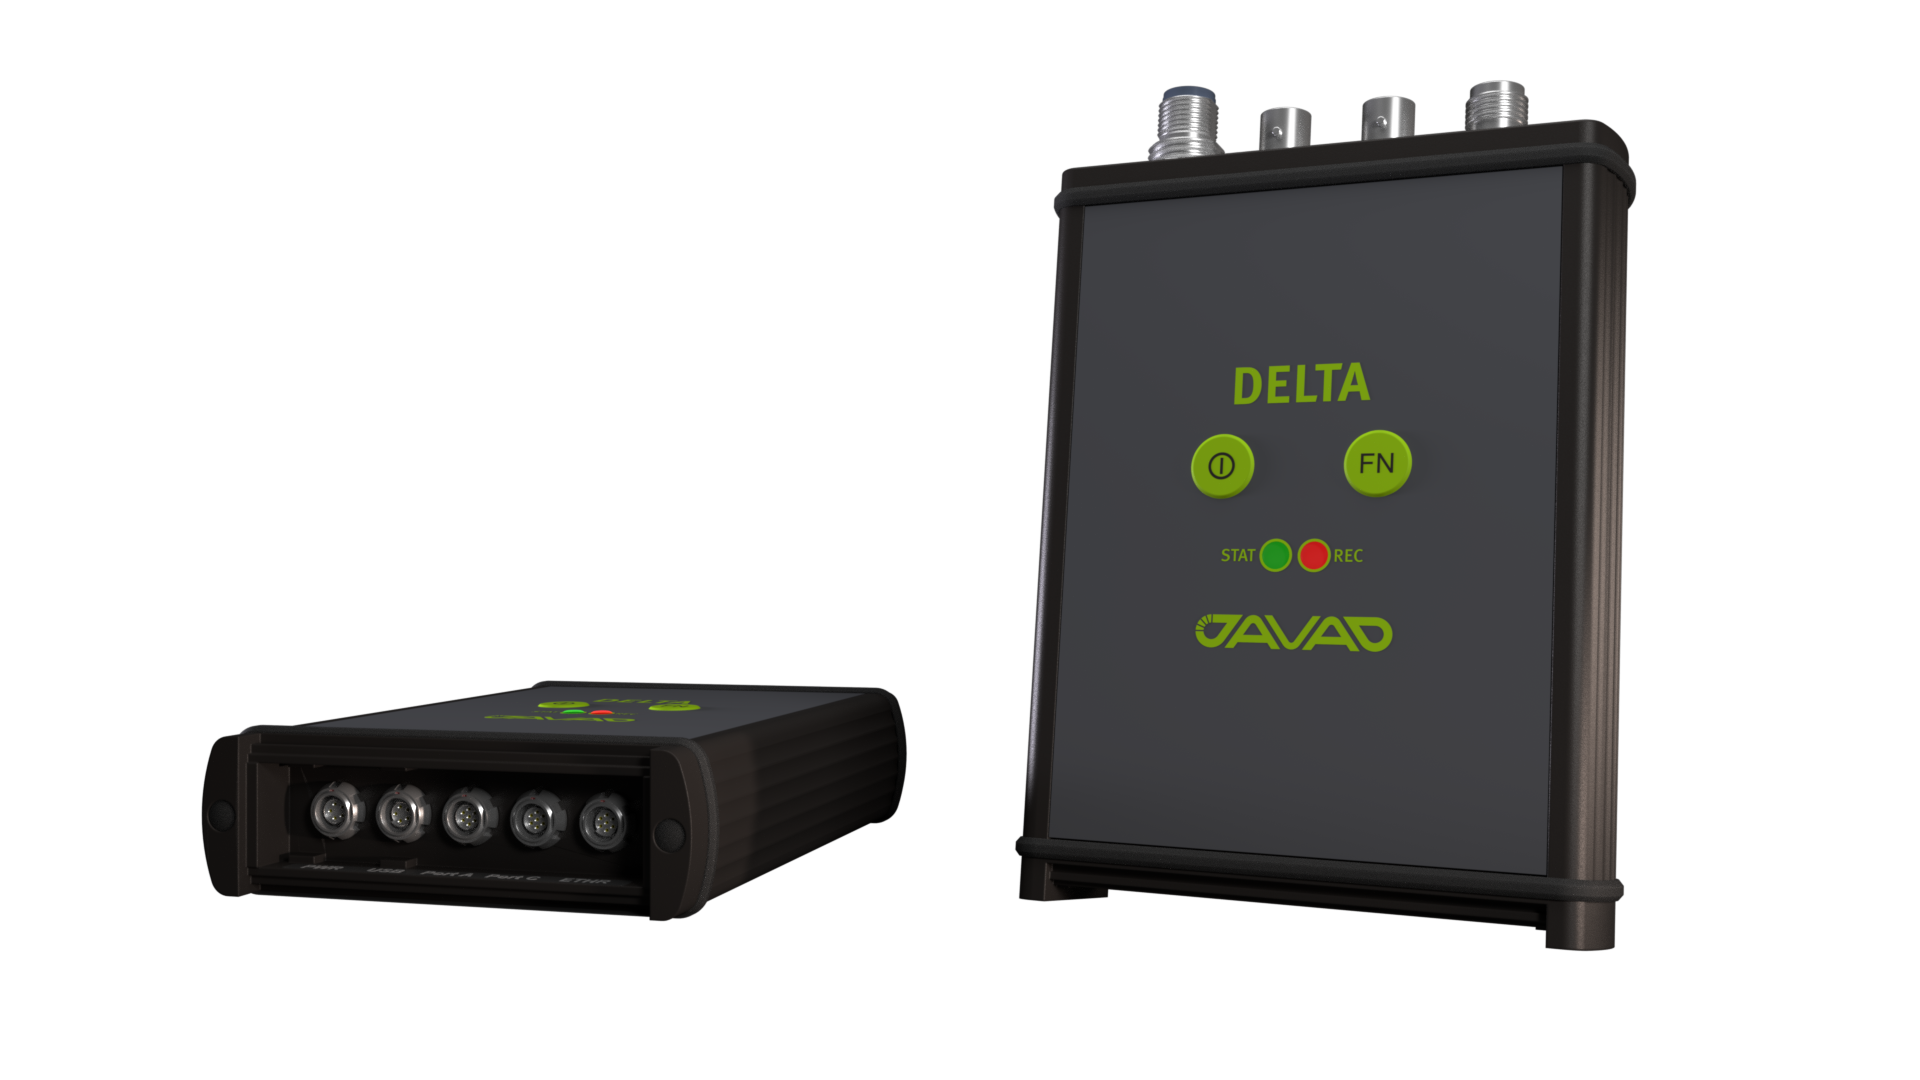 The DELTA is a multi-purpose GNSS receiver enclosure designed for multiple reference station and timing interfaces.